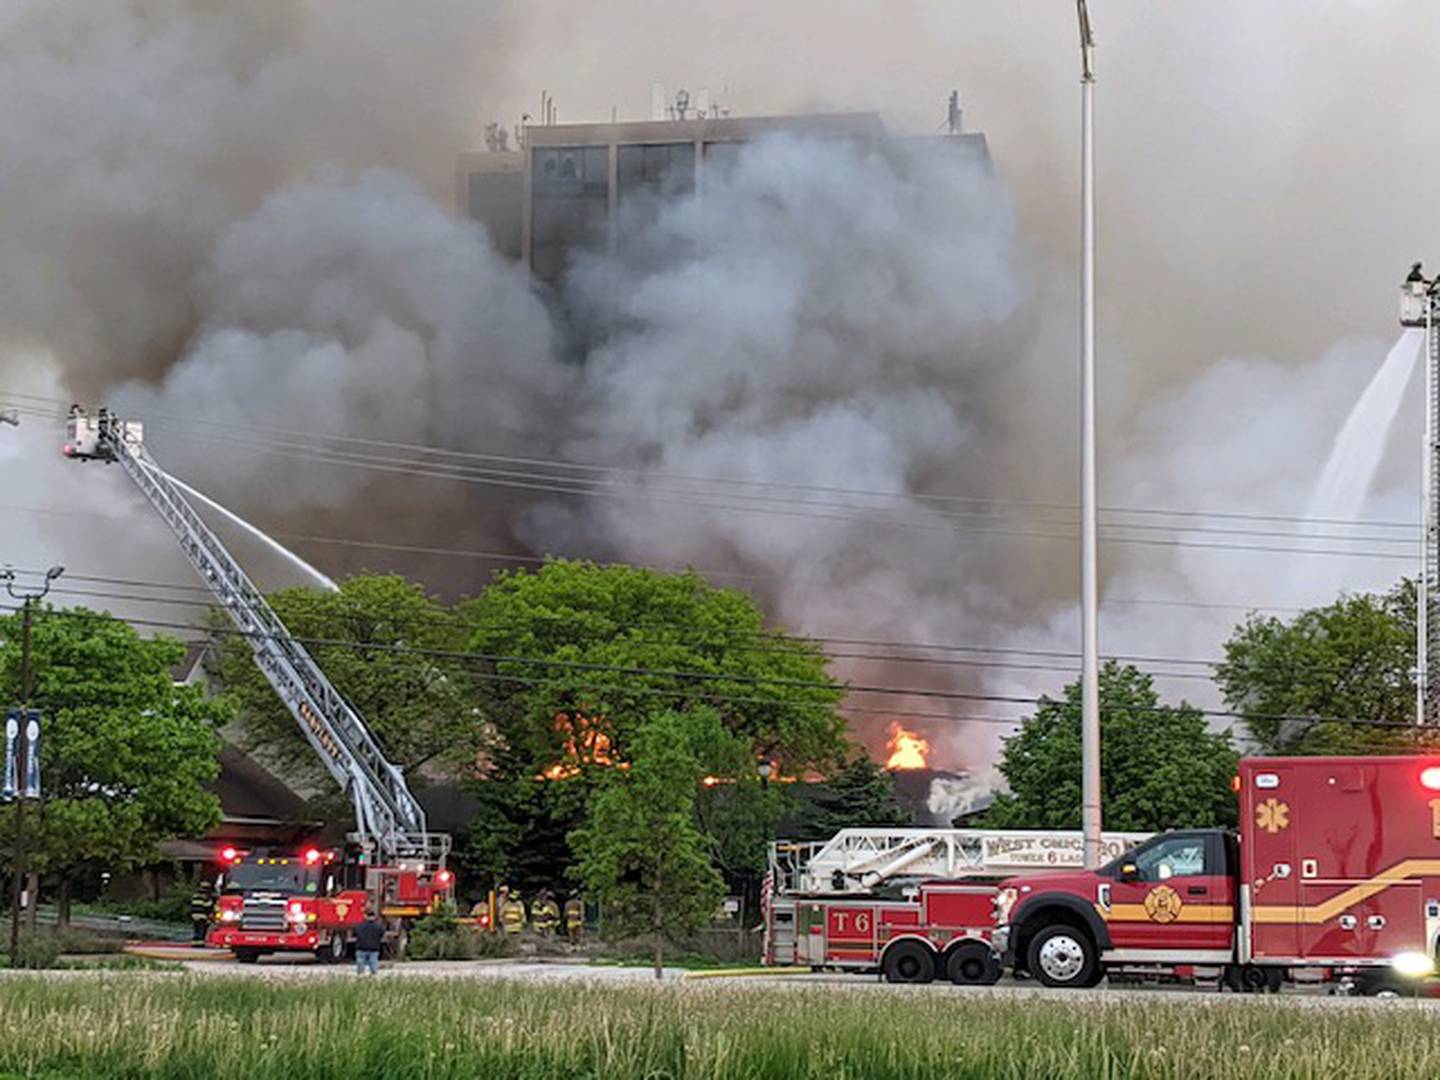 Flames and heavy smoke engulf several buildings at the former Pheasant Run Resort property in St. Charles on May 21, 2022.